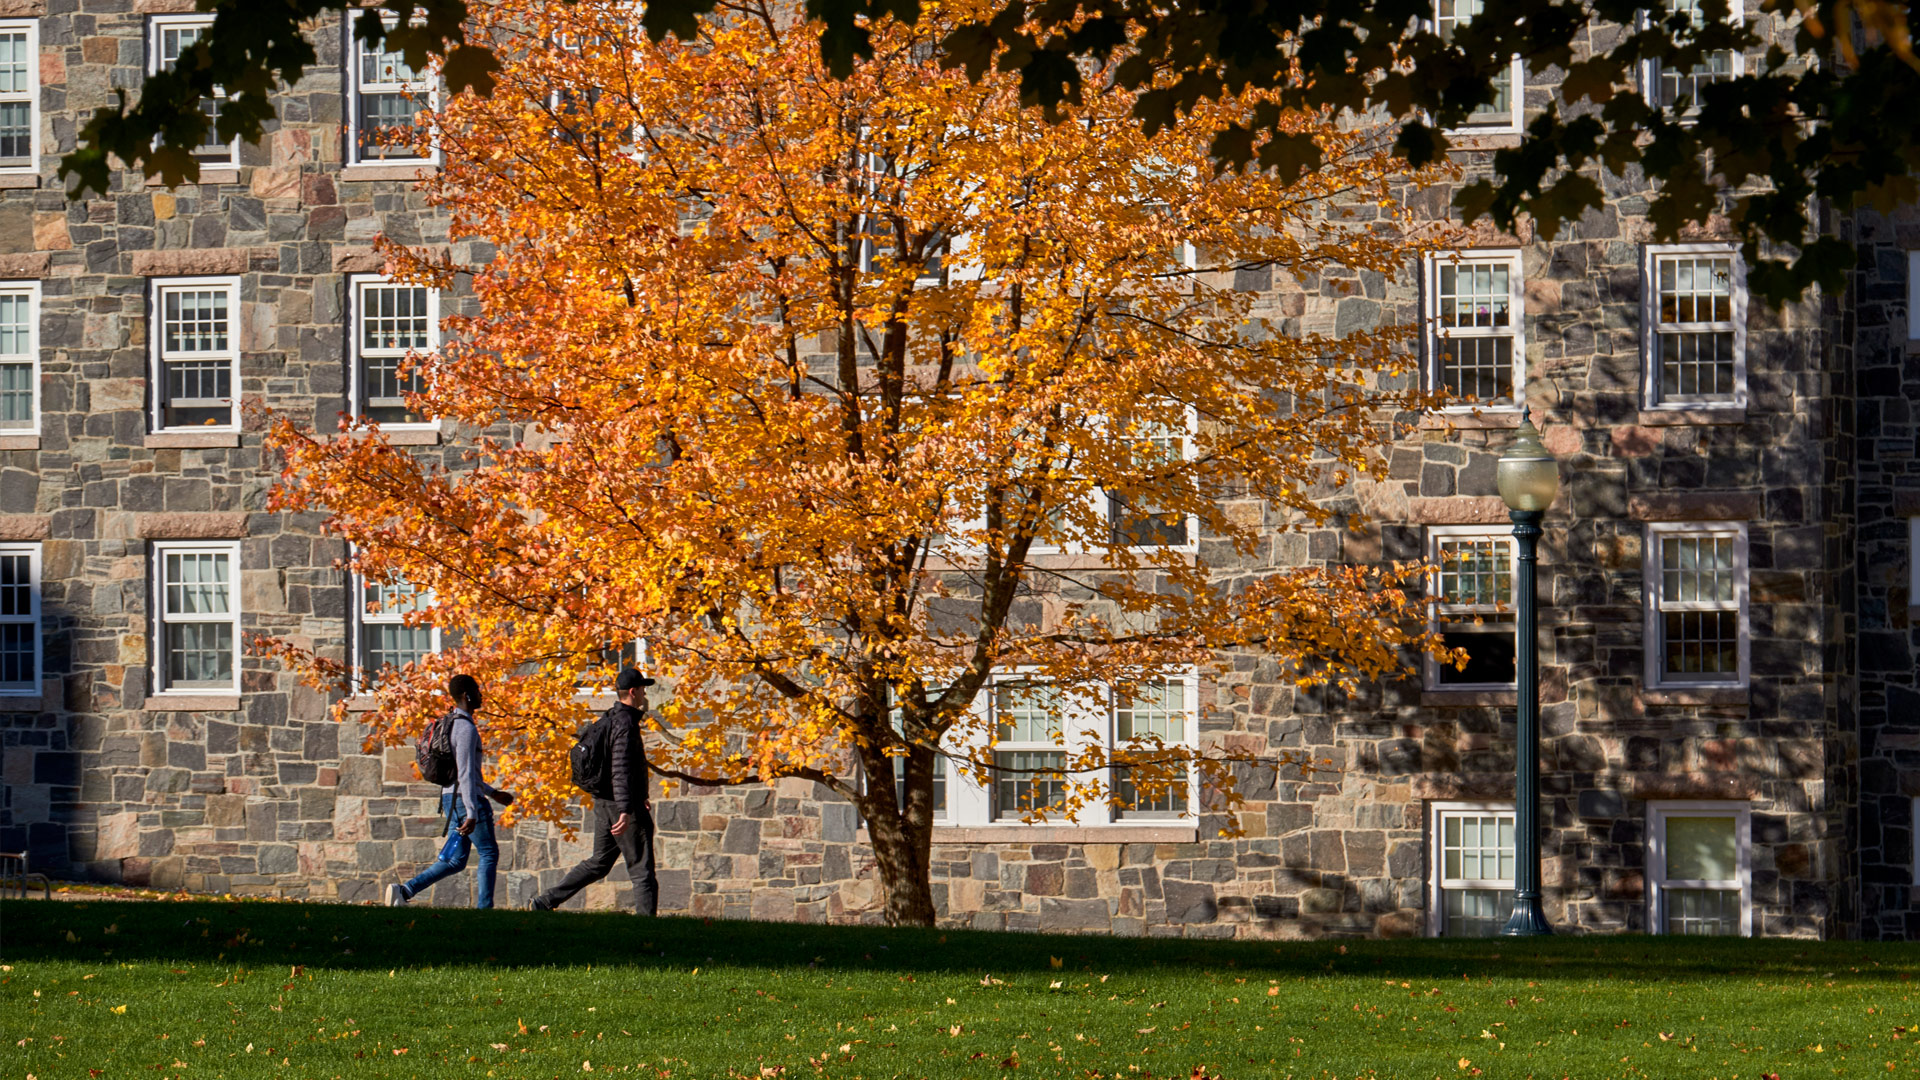 middlebury college admissions visit